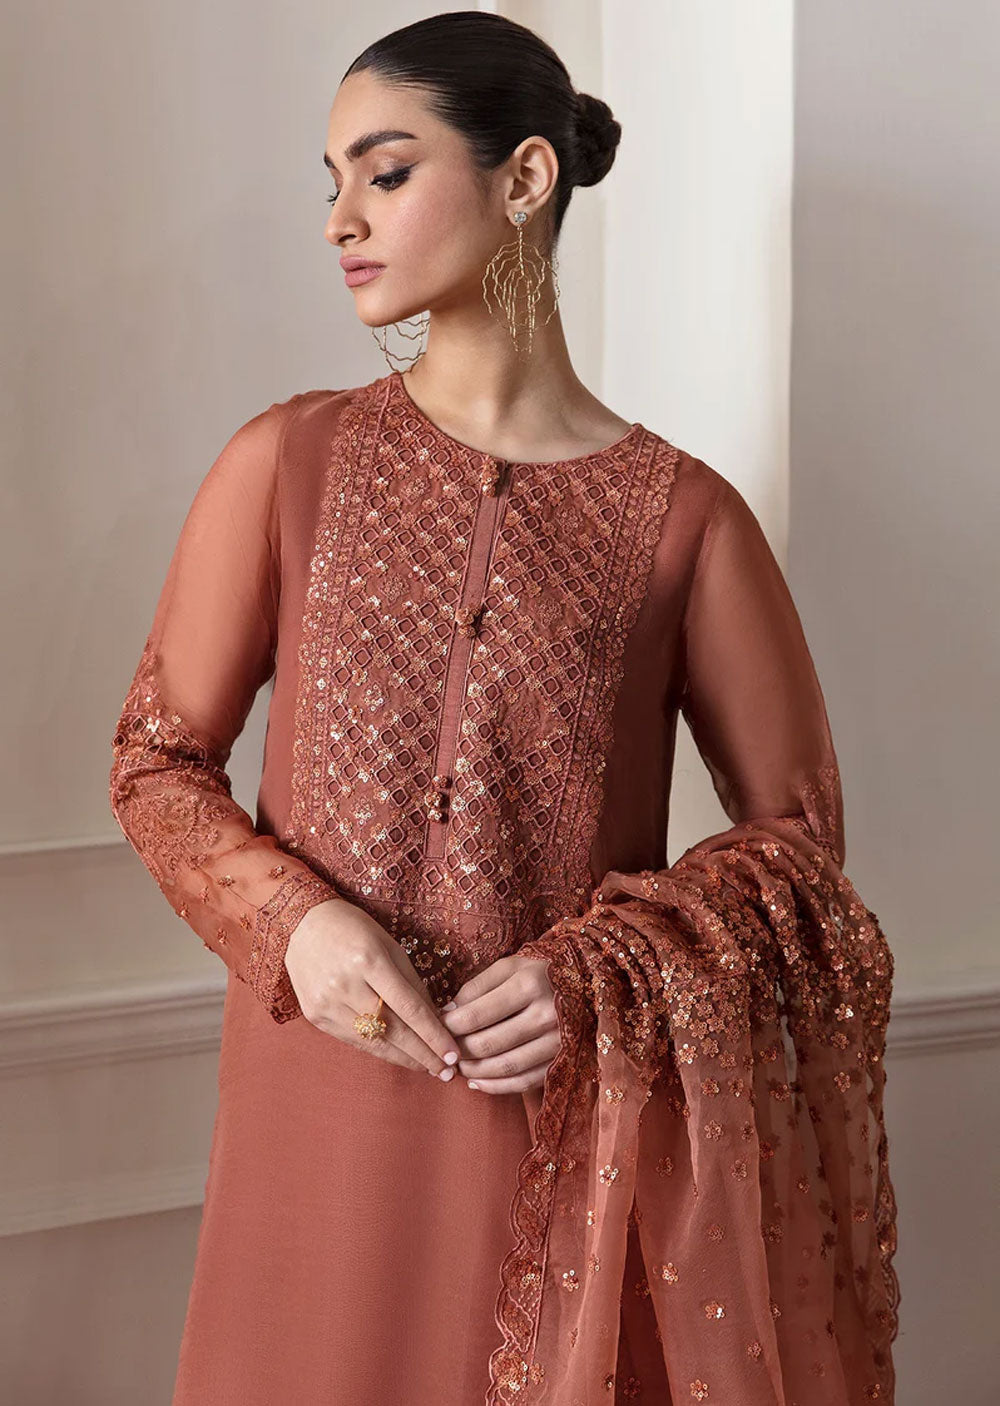 UF-296 - Readymade - Embroidered Chiffon Suit - Memsaab Online